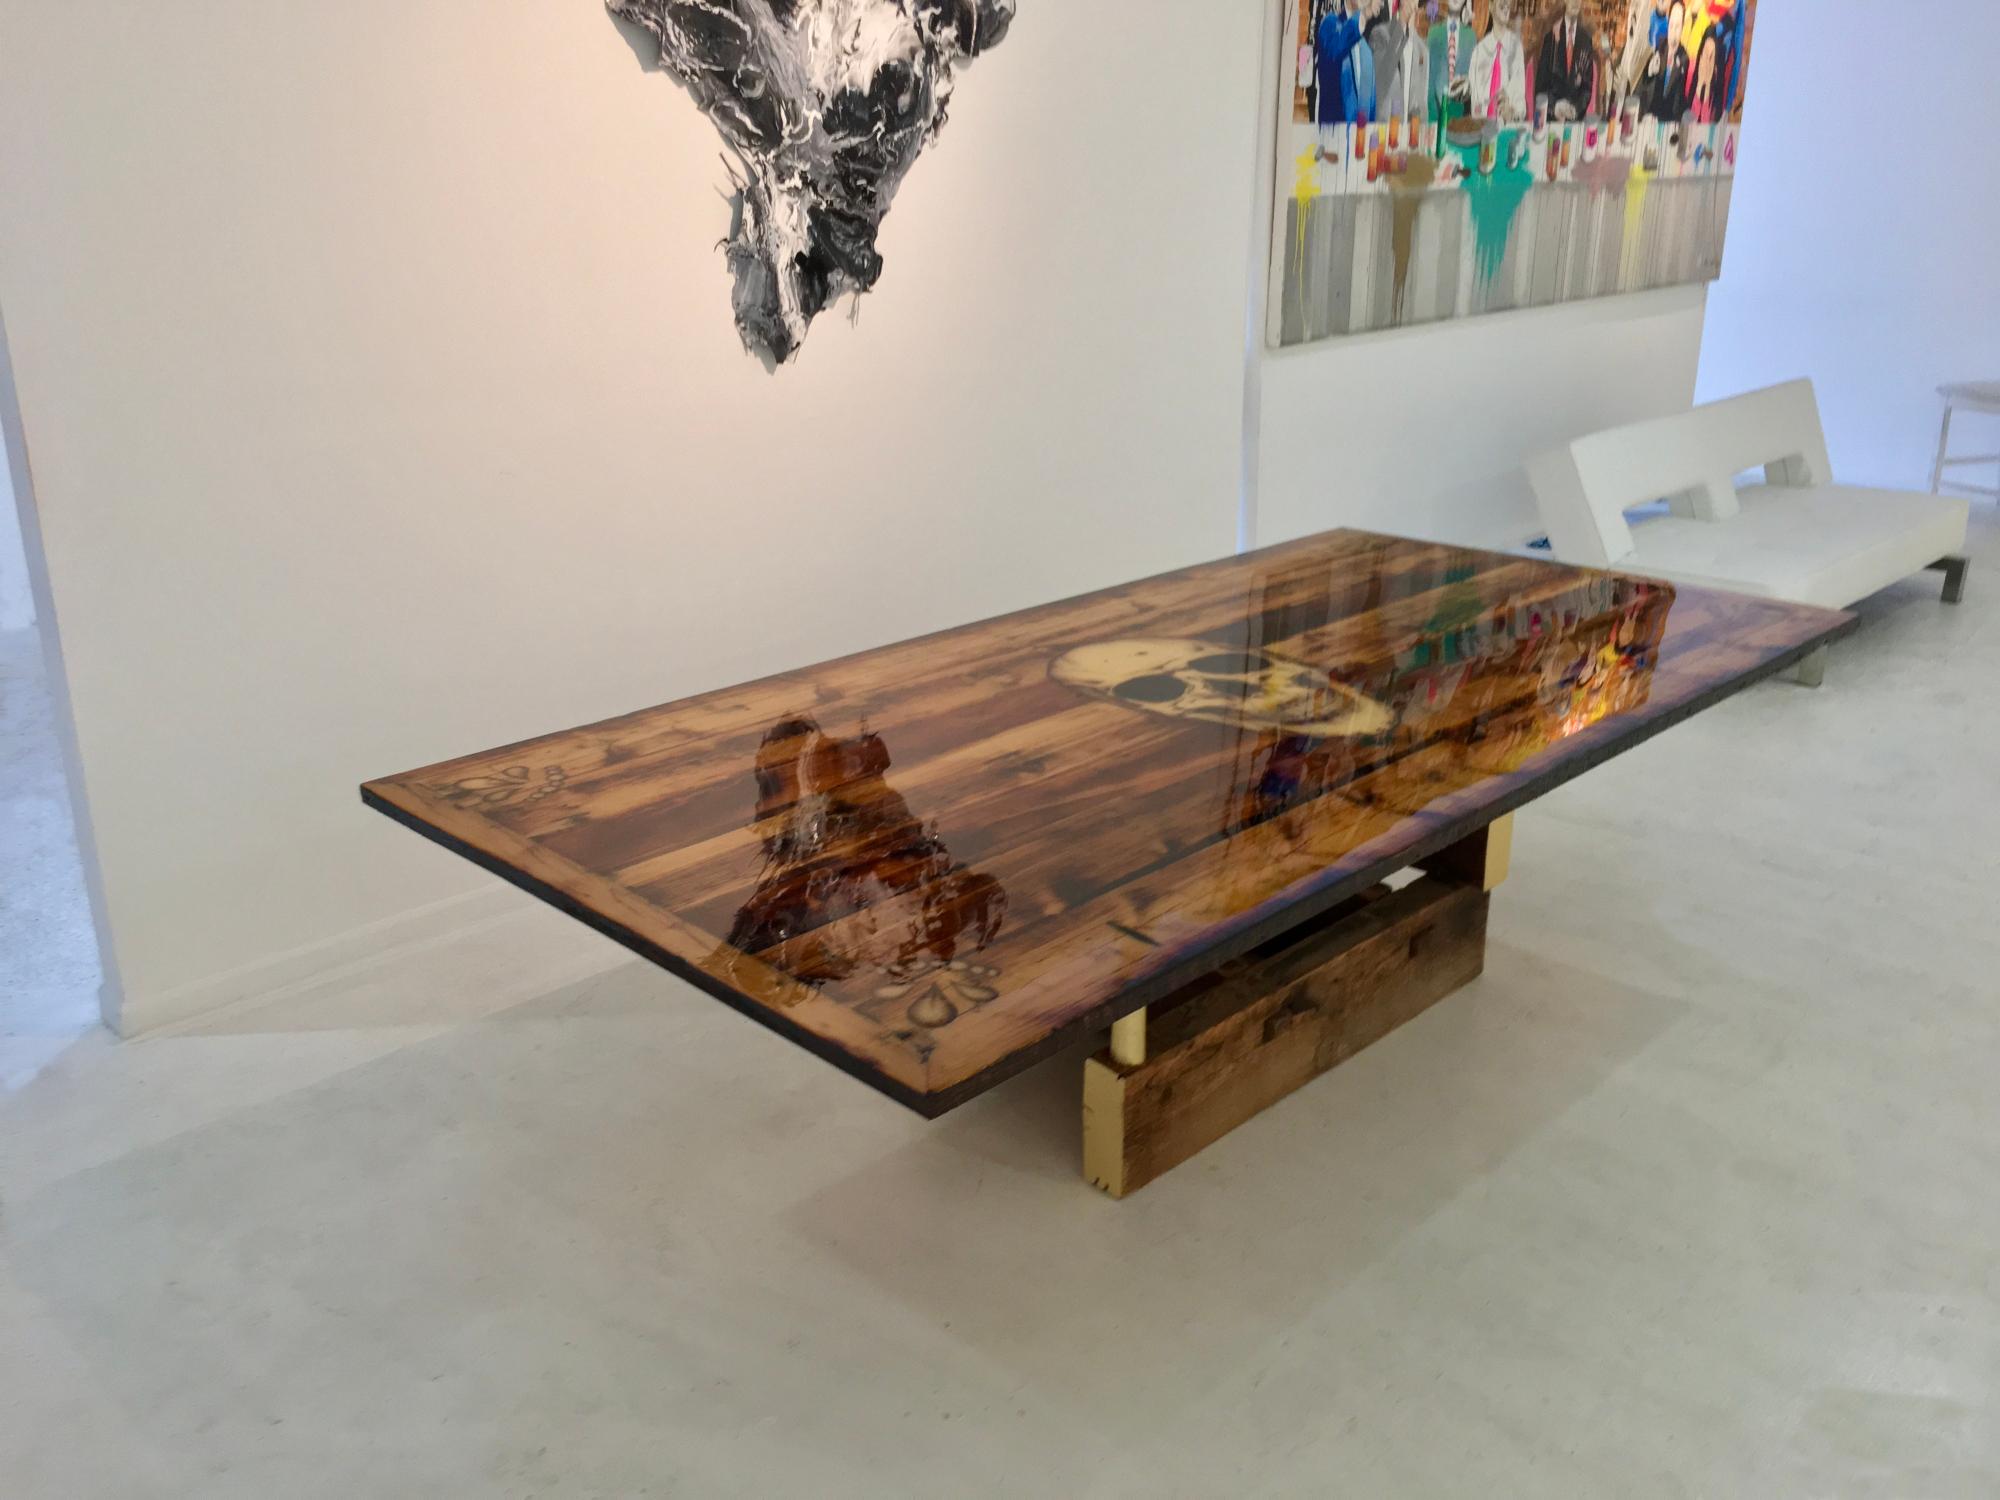 Rafael designed and handcrafted the Skull Dining Table from the reclaimed 150-year-old Douglas fir beams he salvaged from Manhattan townhomes. Their surfaces are aged with a beautiful golden brown patina; saw marks, nails, bolt holes, and natural